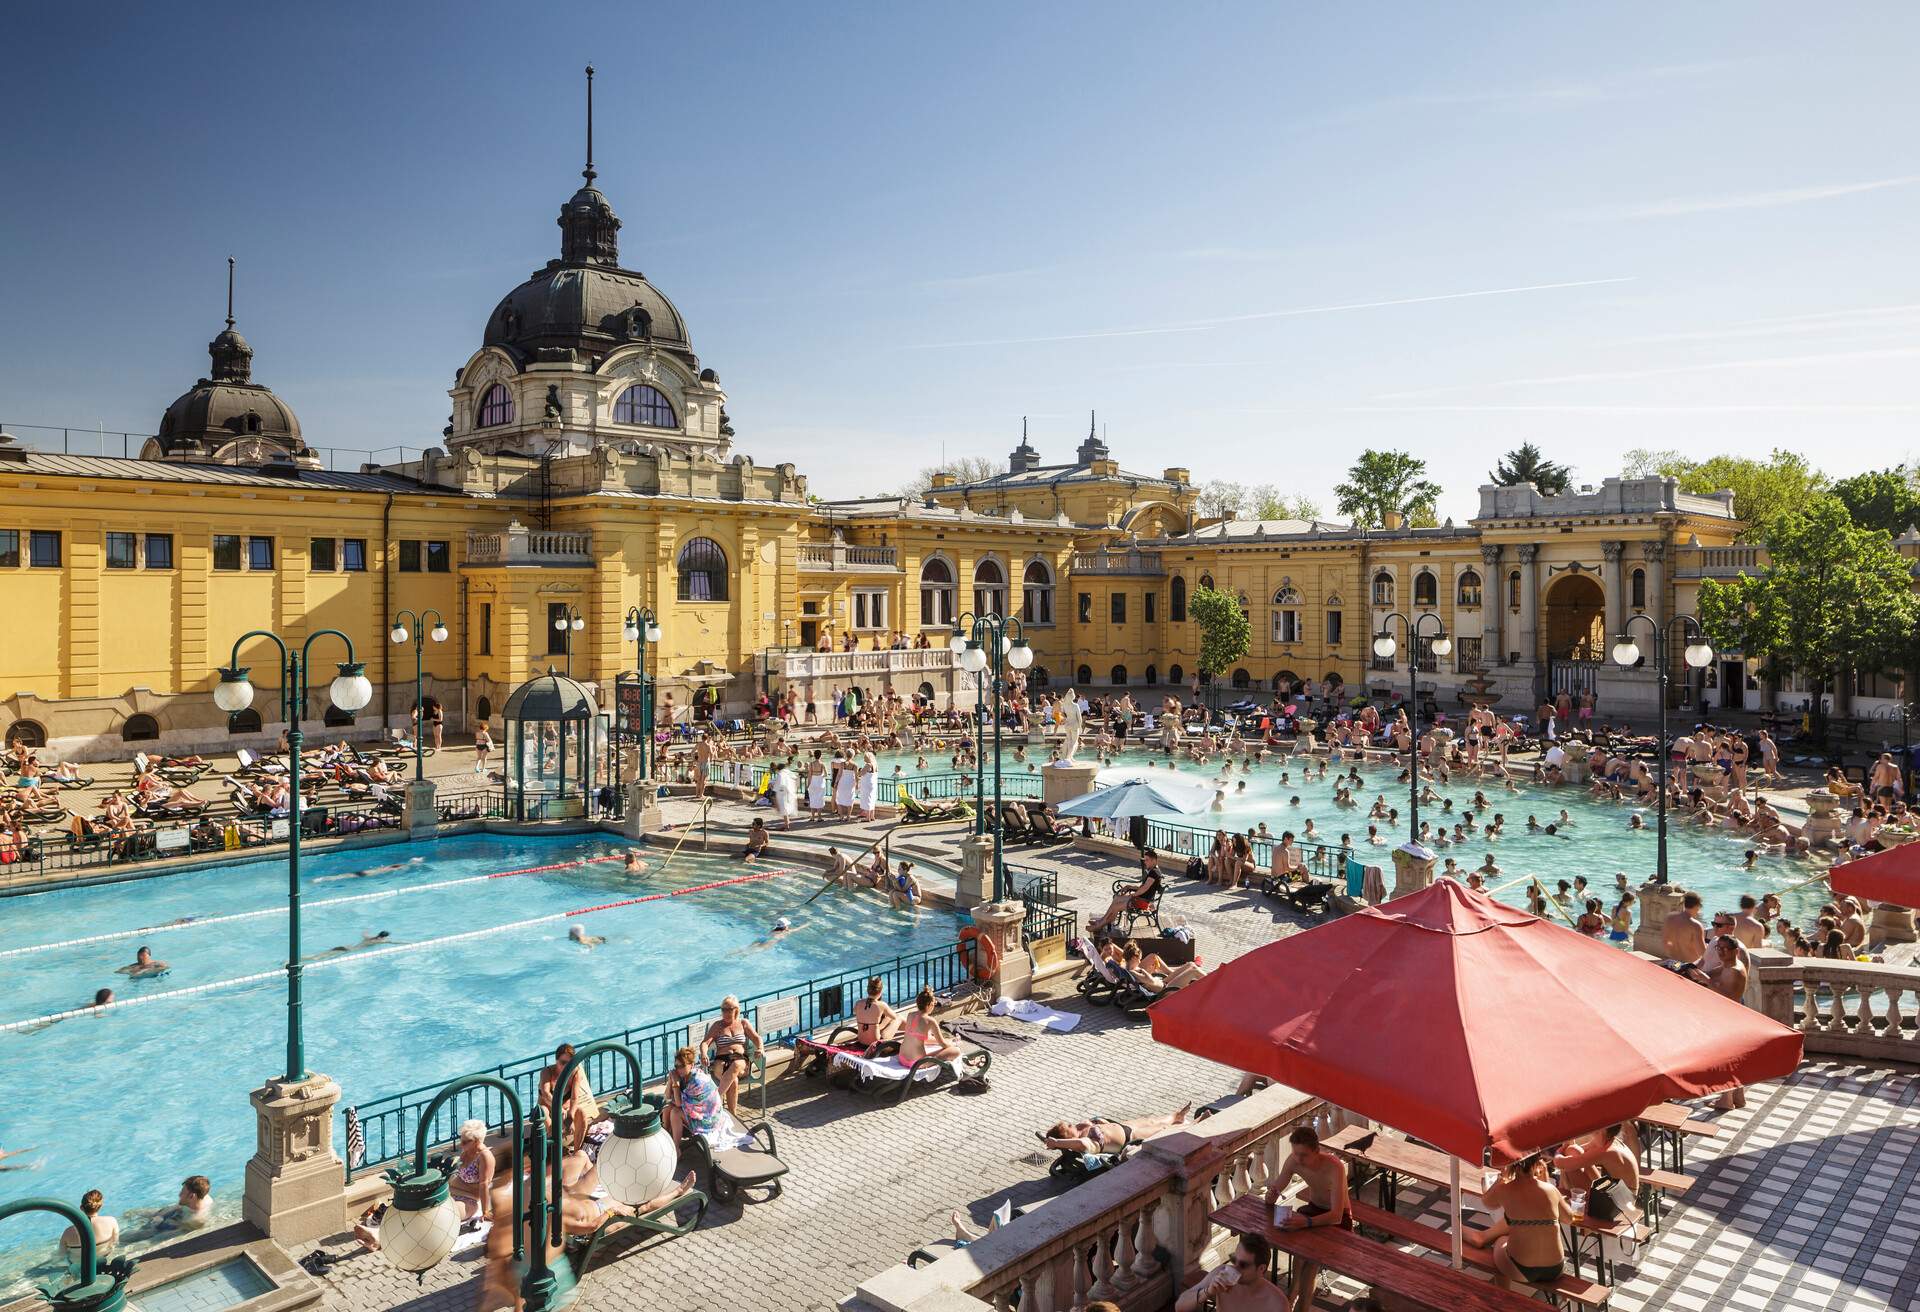 The largest medicinal bath in Europe, the Szechenyi Thermal Bath dates from the late 19th century.